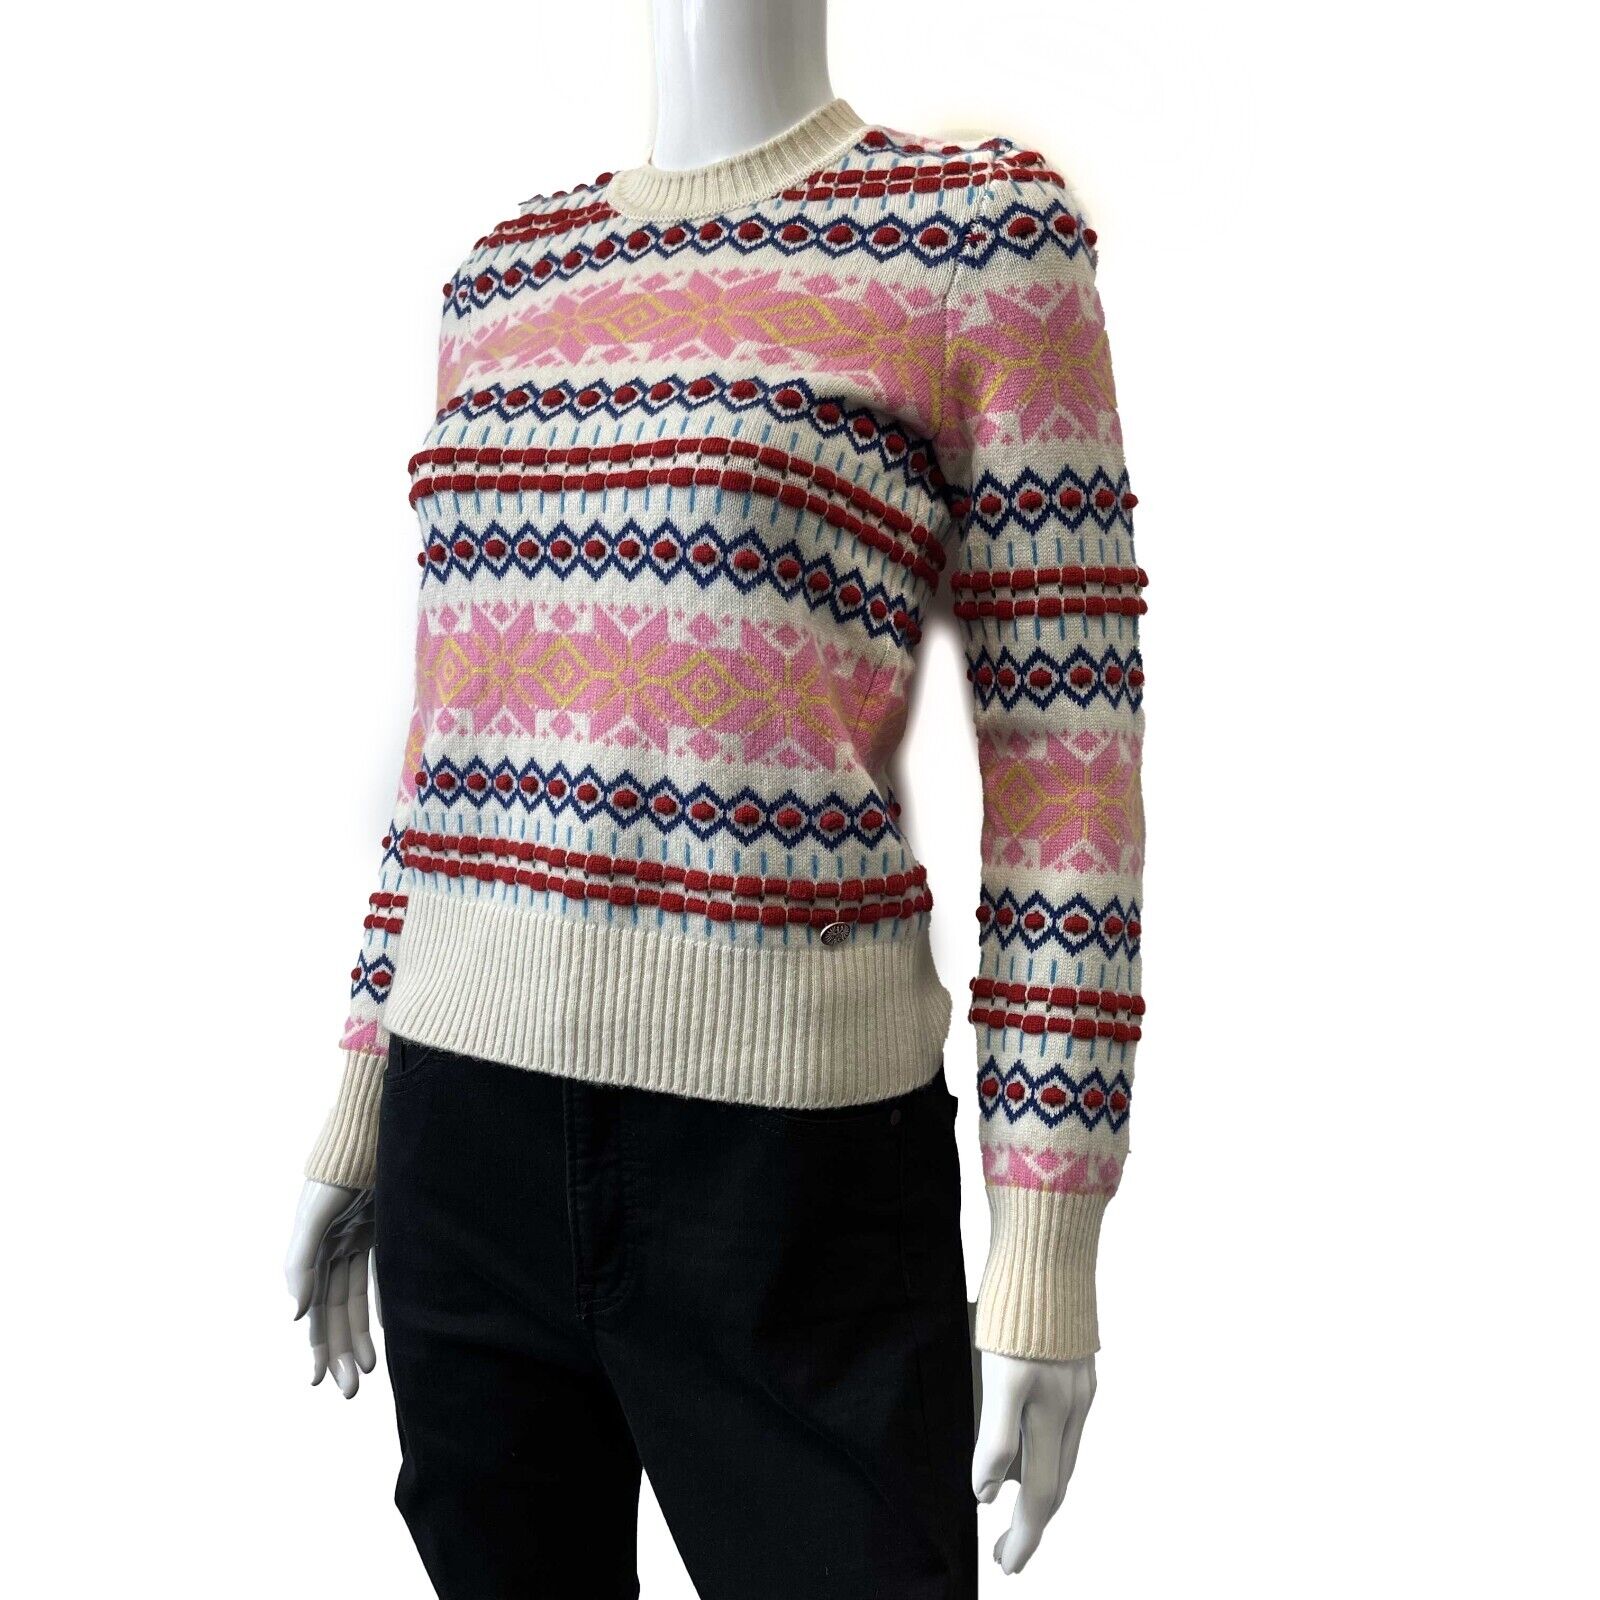 Chanel - Authenticated Knitwear & Sweatshirt - Cotton Multicolour for Women, Very Good Condition